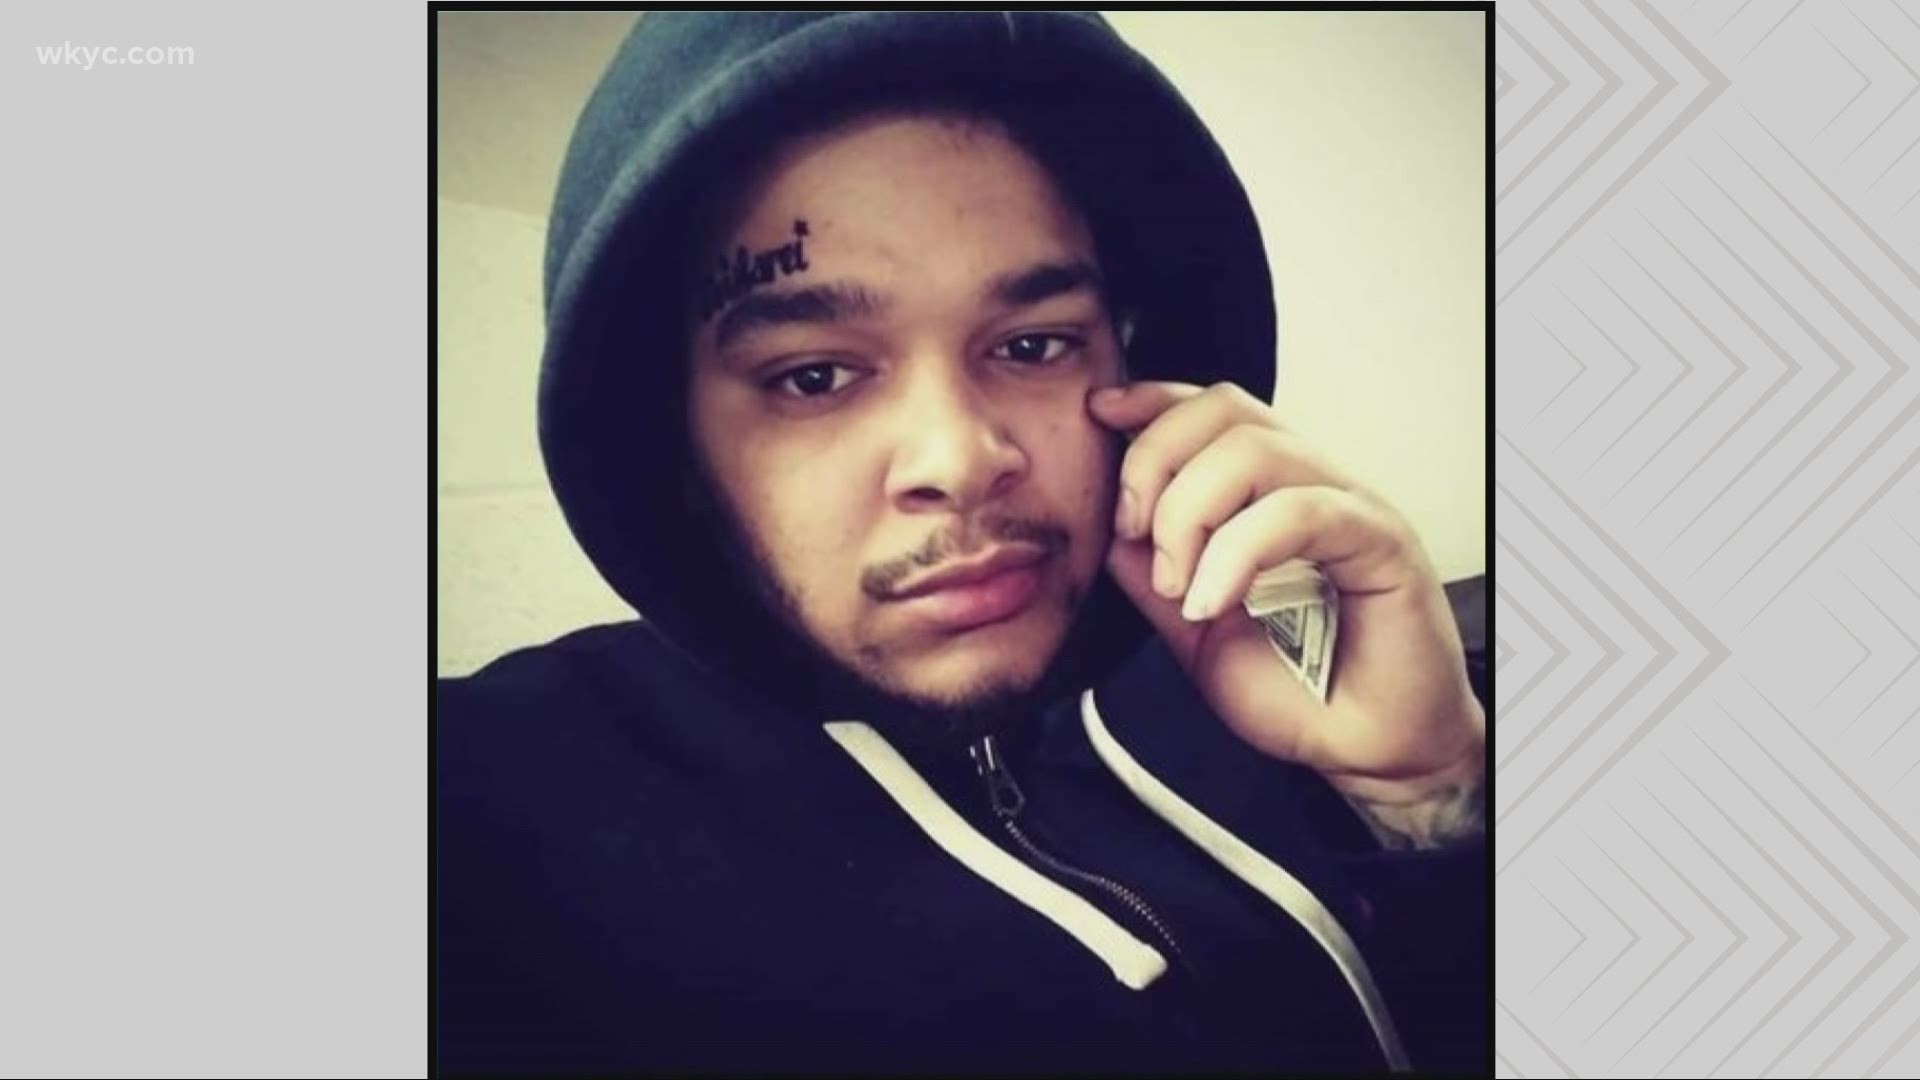 The 22-year-old was shot and killed by off-duty Cleveland Police Officer Jose Garcia last year. A grand jury couldn't prove Garcia didn't act in self defense.